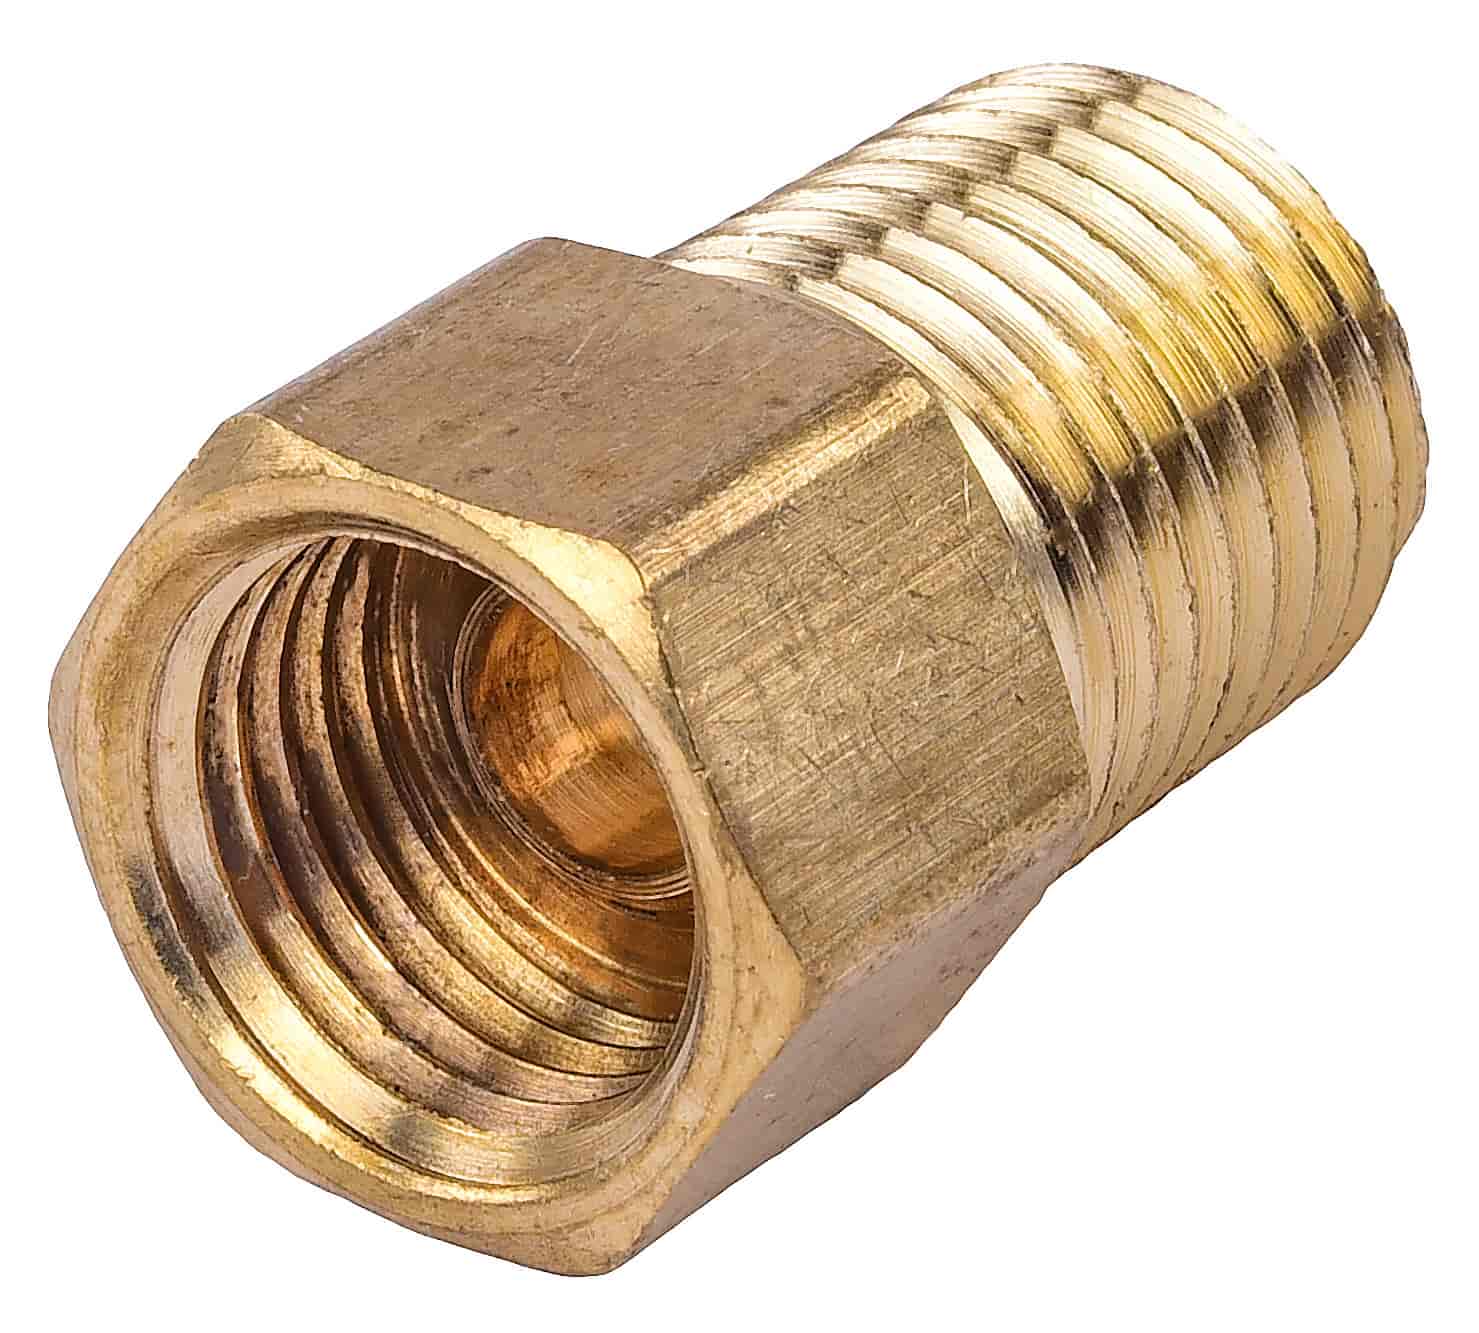 1/4 Male NPT x 1/4 Flare (SAE) Brass Adapter